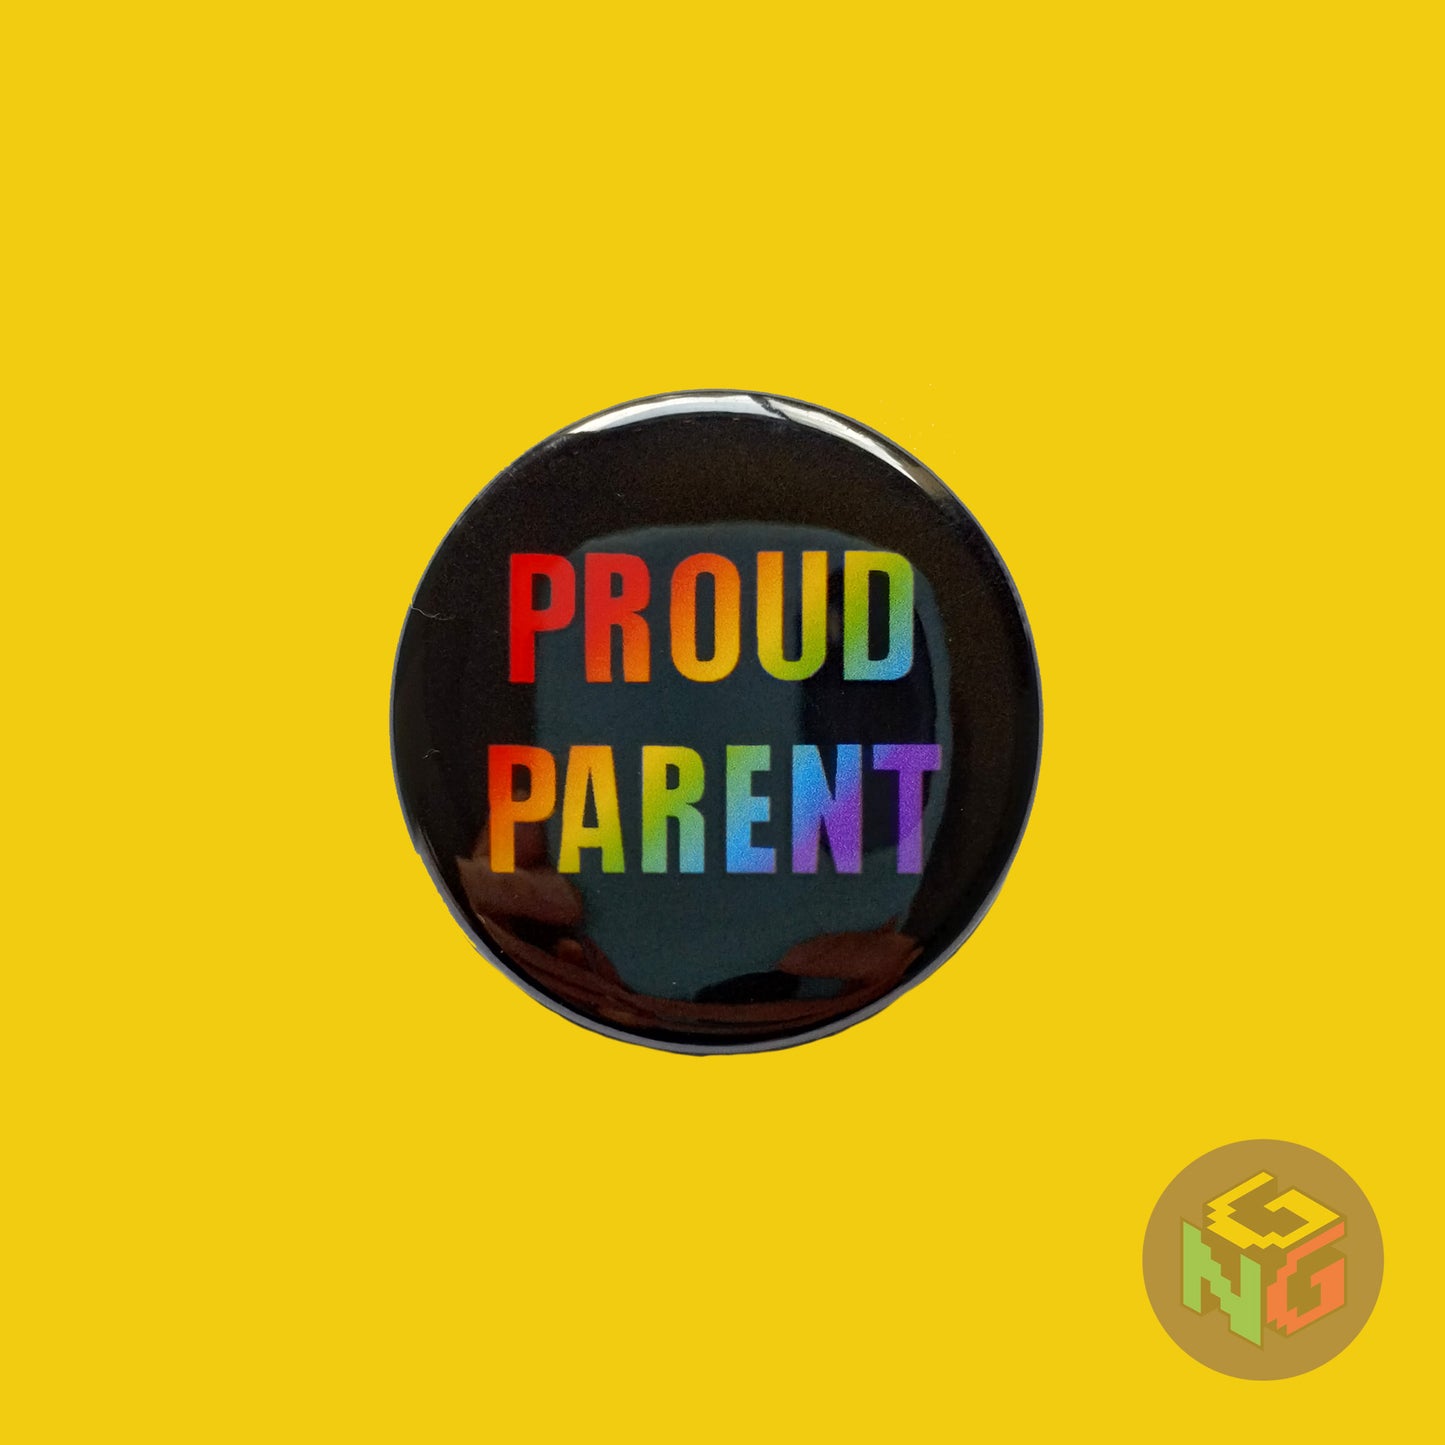 rainbow proud parent button on yellow background